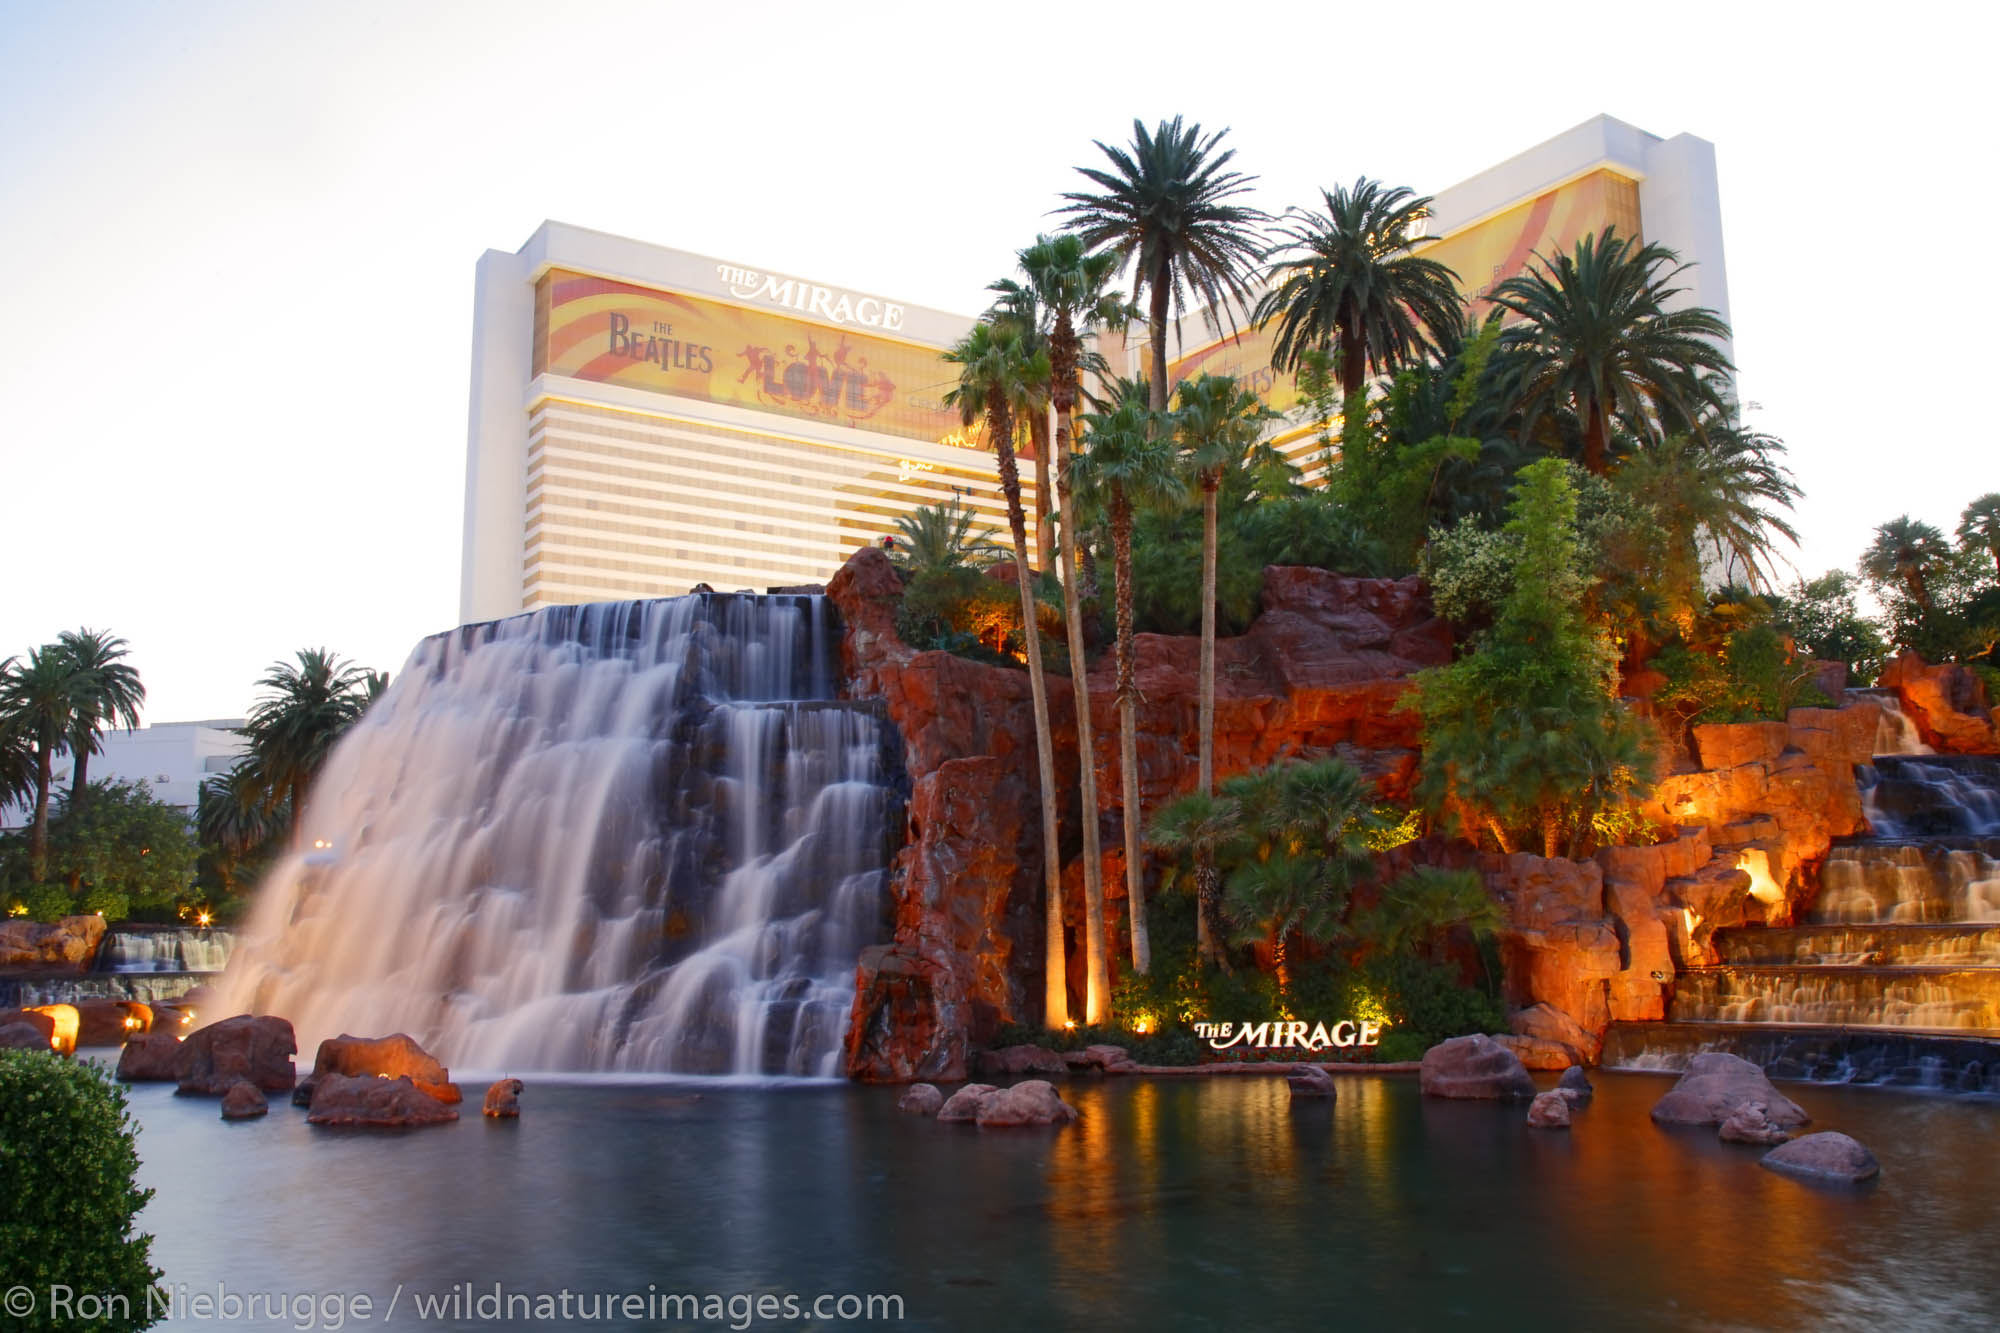 The Mirage Hotel and Casino on the Las Vegas Strip, Nevada.